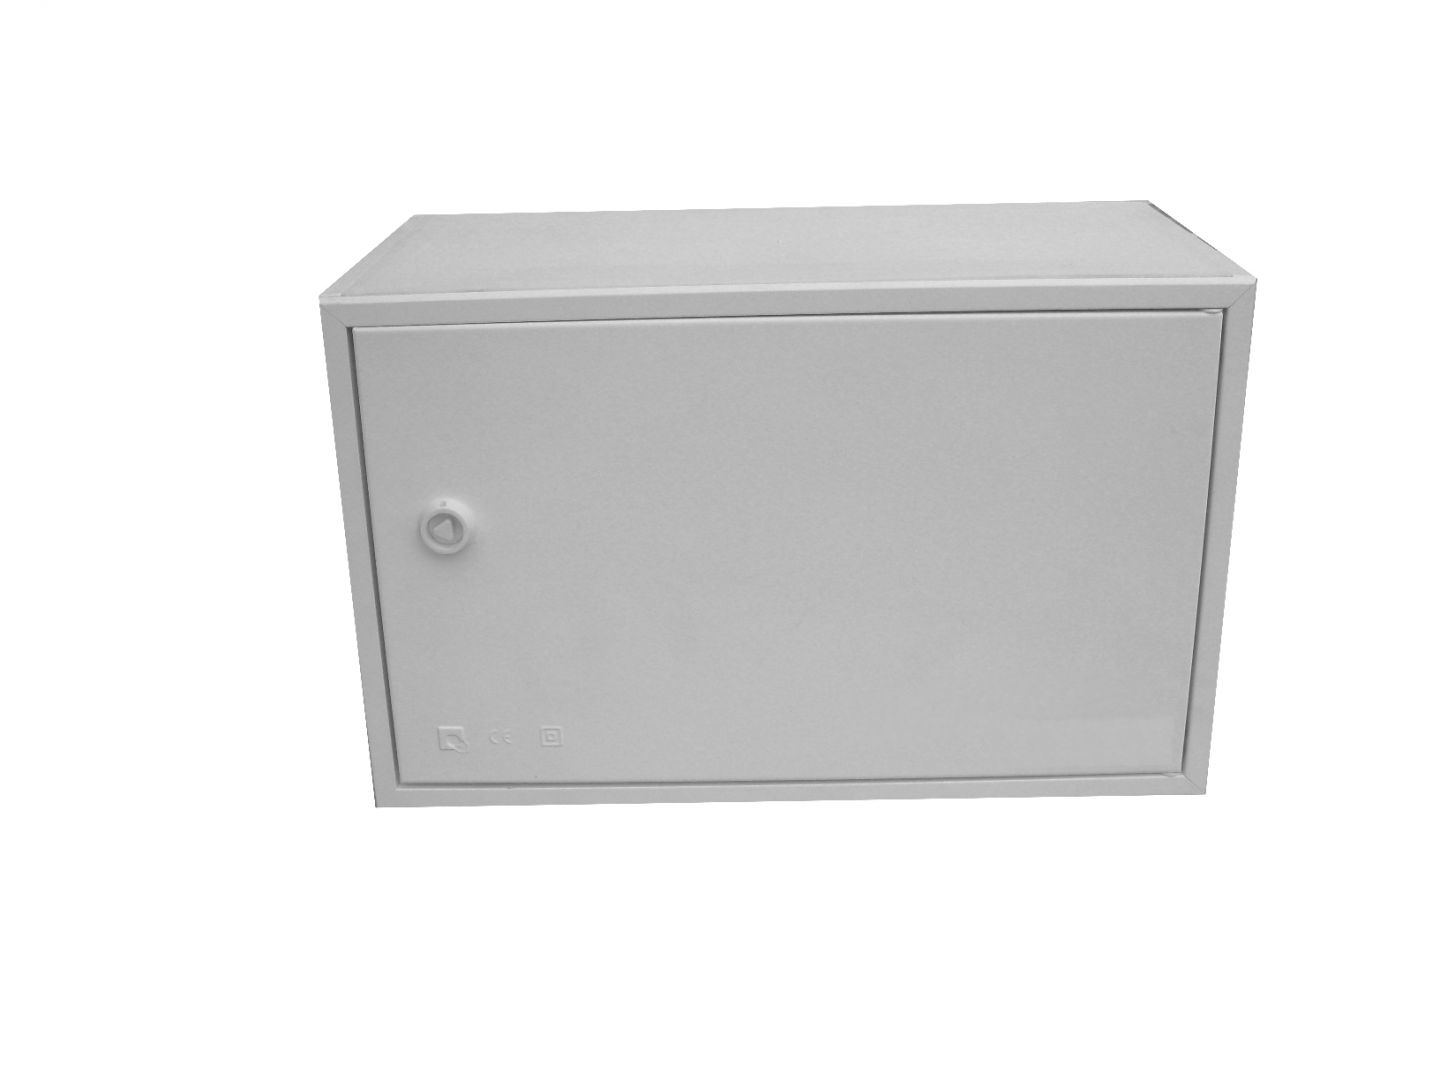 EMPTY BUILT-IN VISBOX BOX WITH DOOR AND FRAME 380X250X130